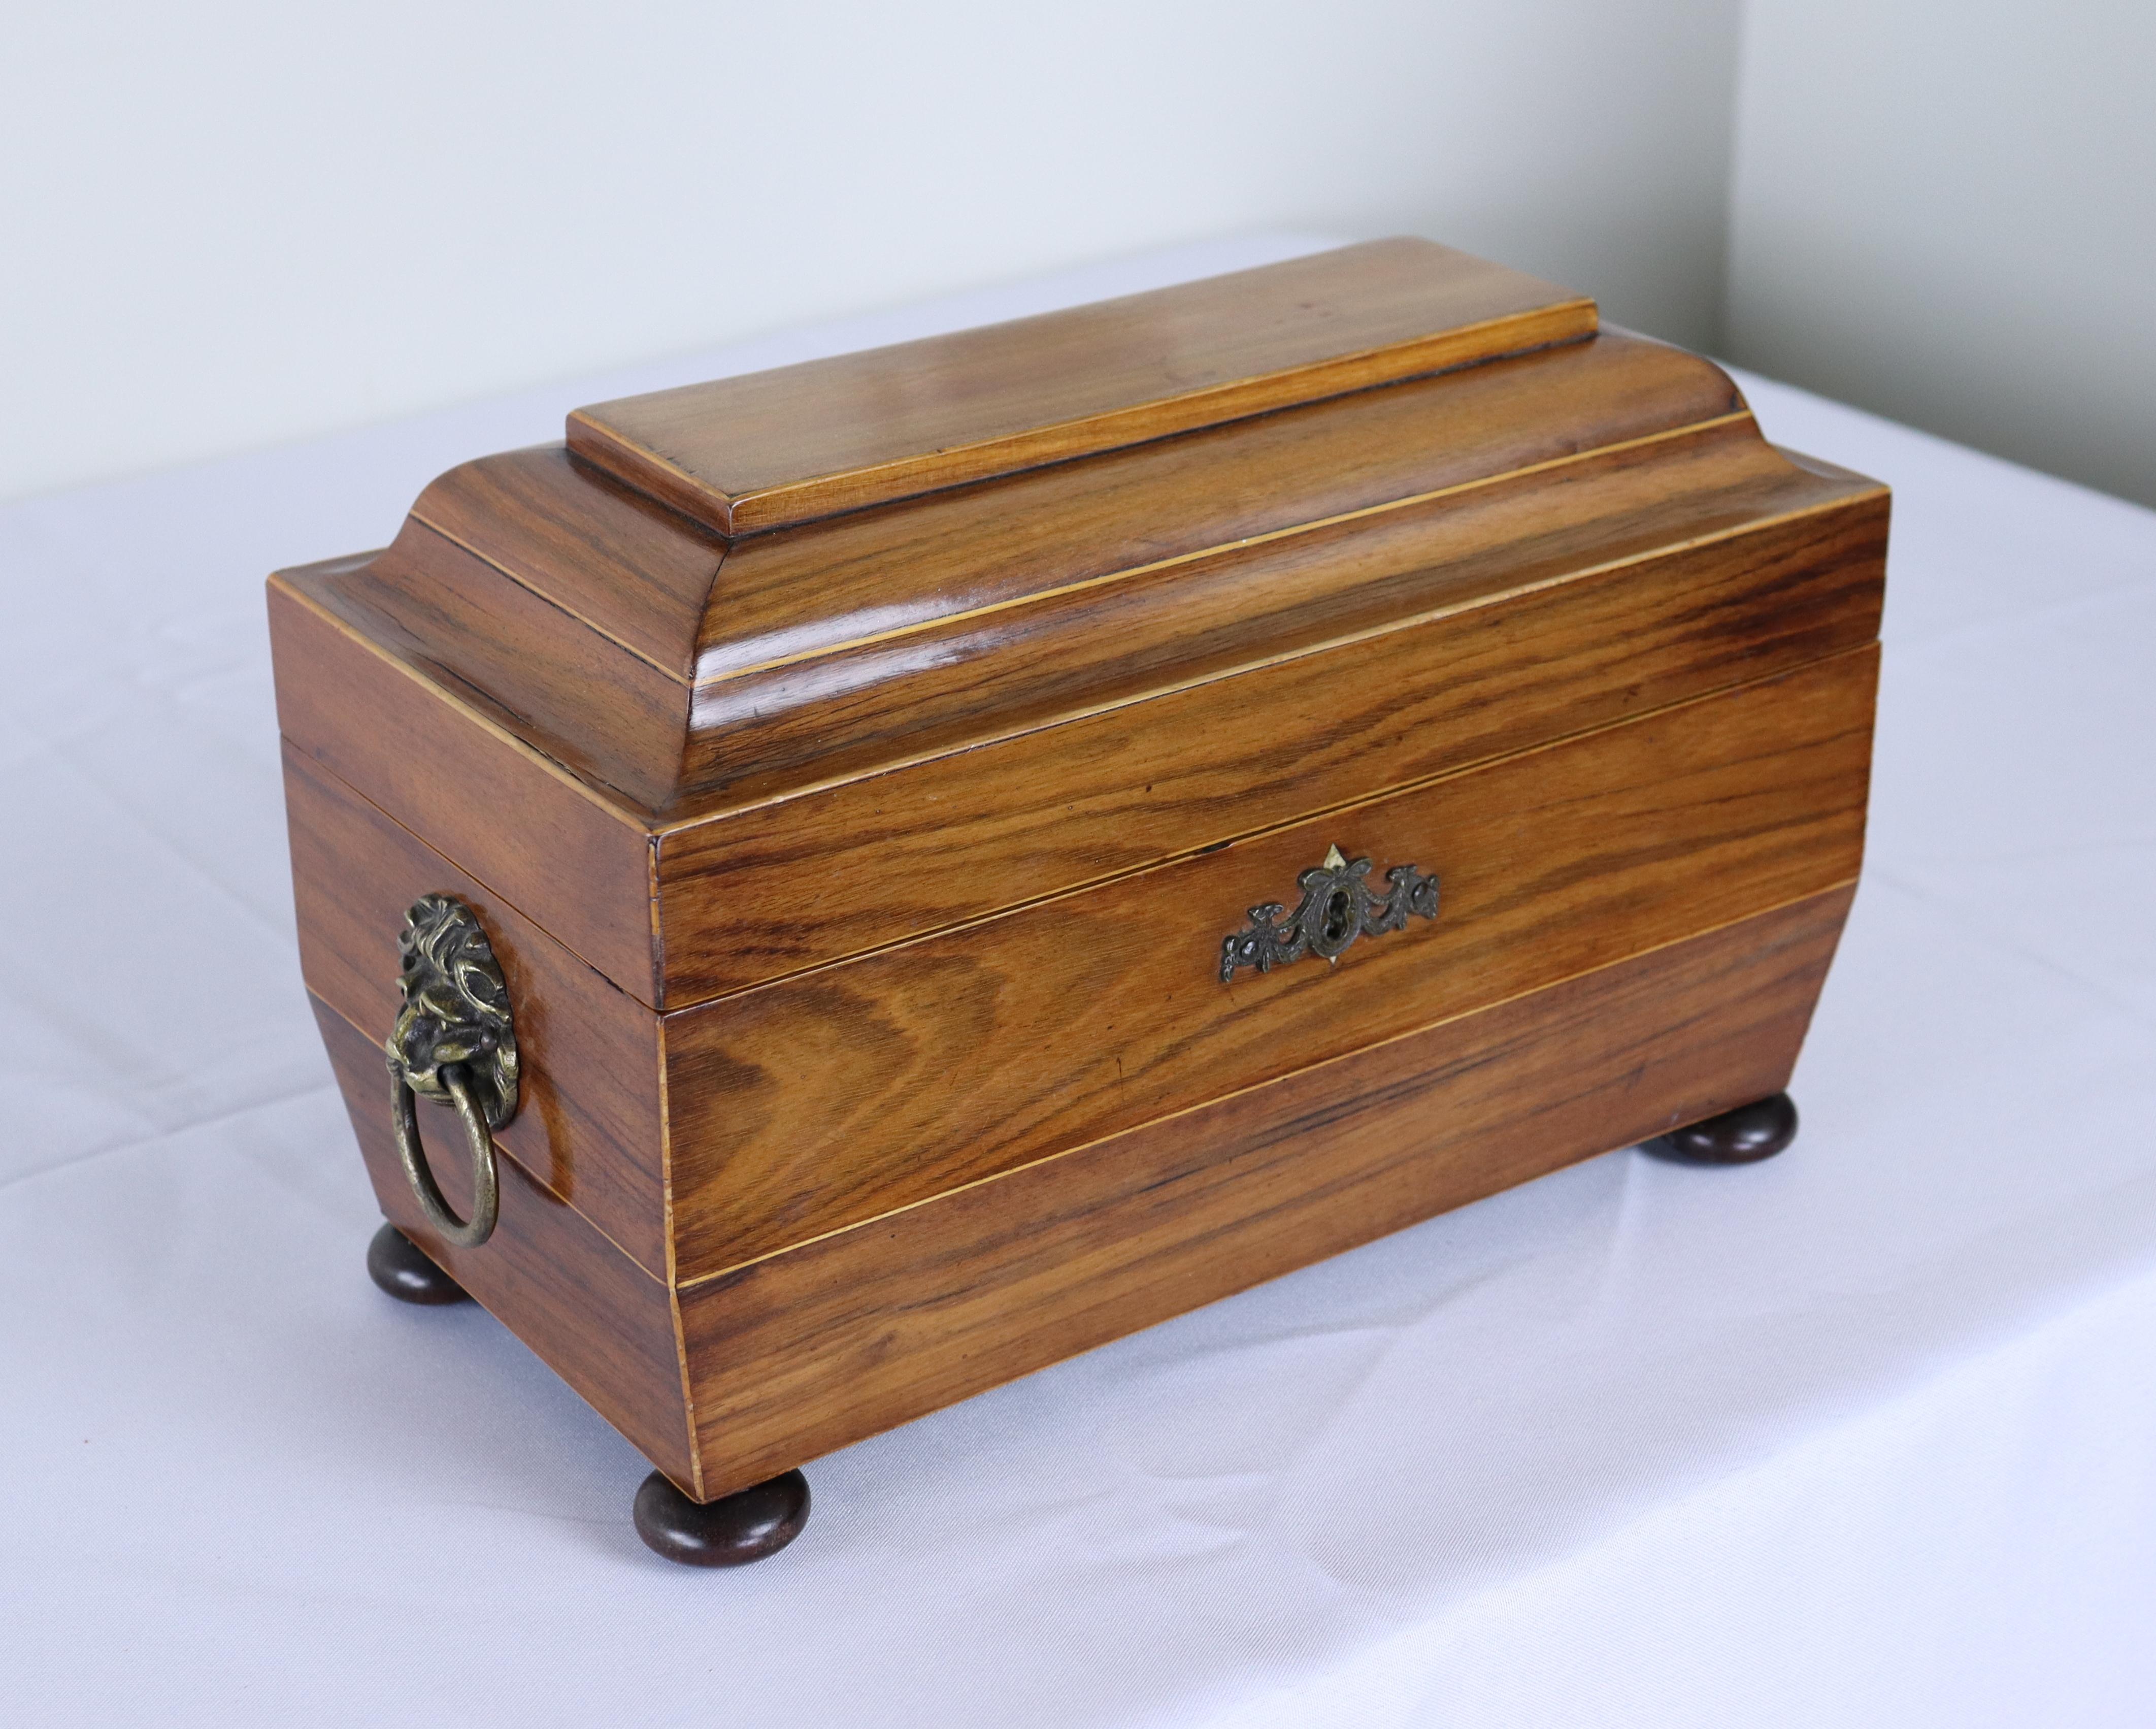 An early double tea caddy with satinwood inlay around the top and brass lions head handles on either side.  The two interior tea compartments and the glass insert are all in good antique condition.  The mahogany has wonderful shine and patina, and